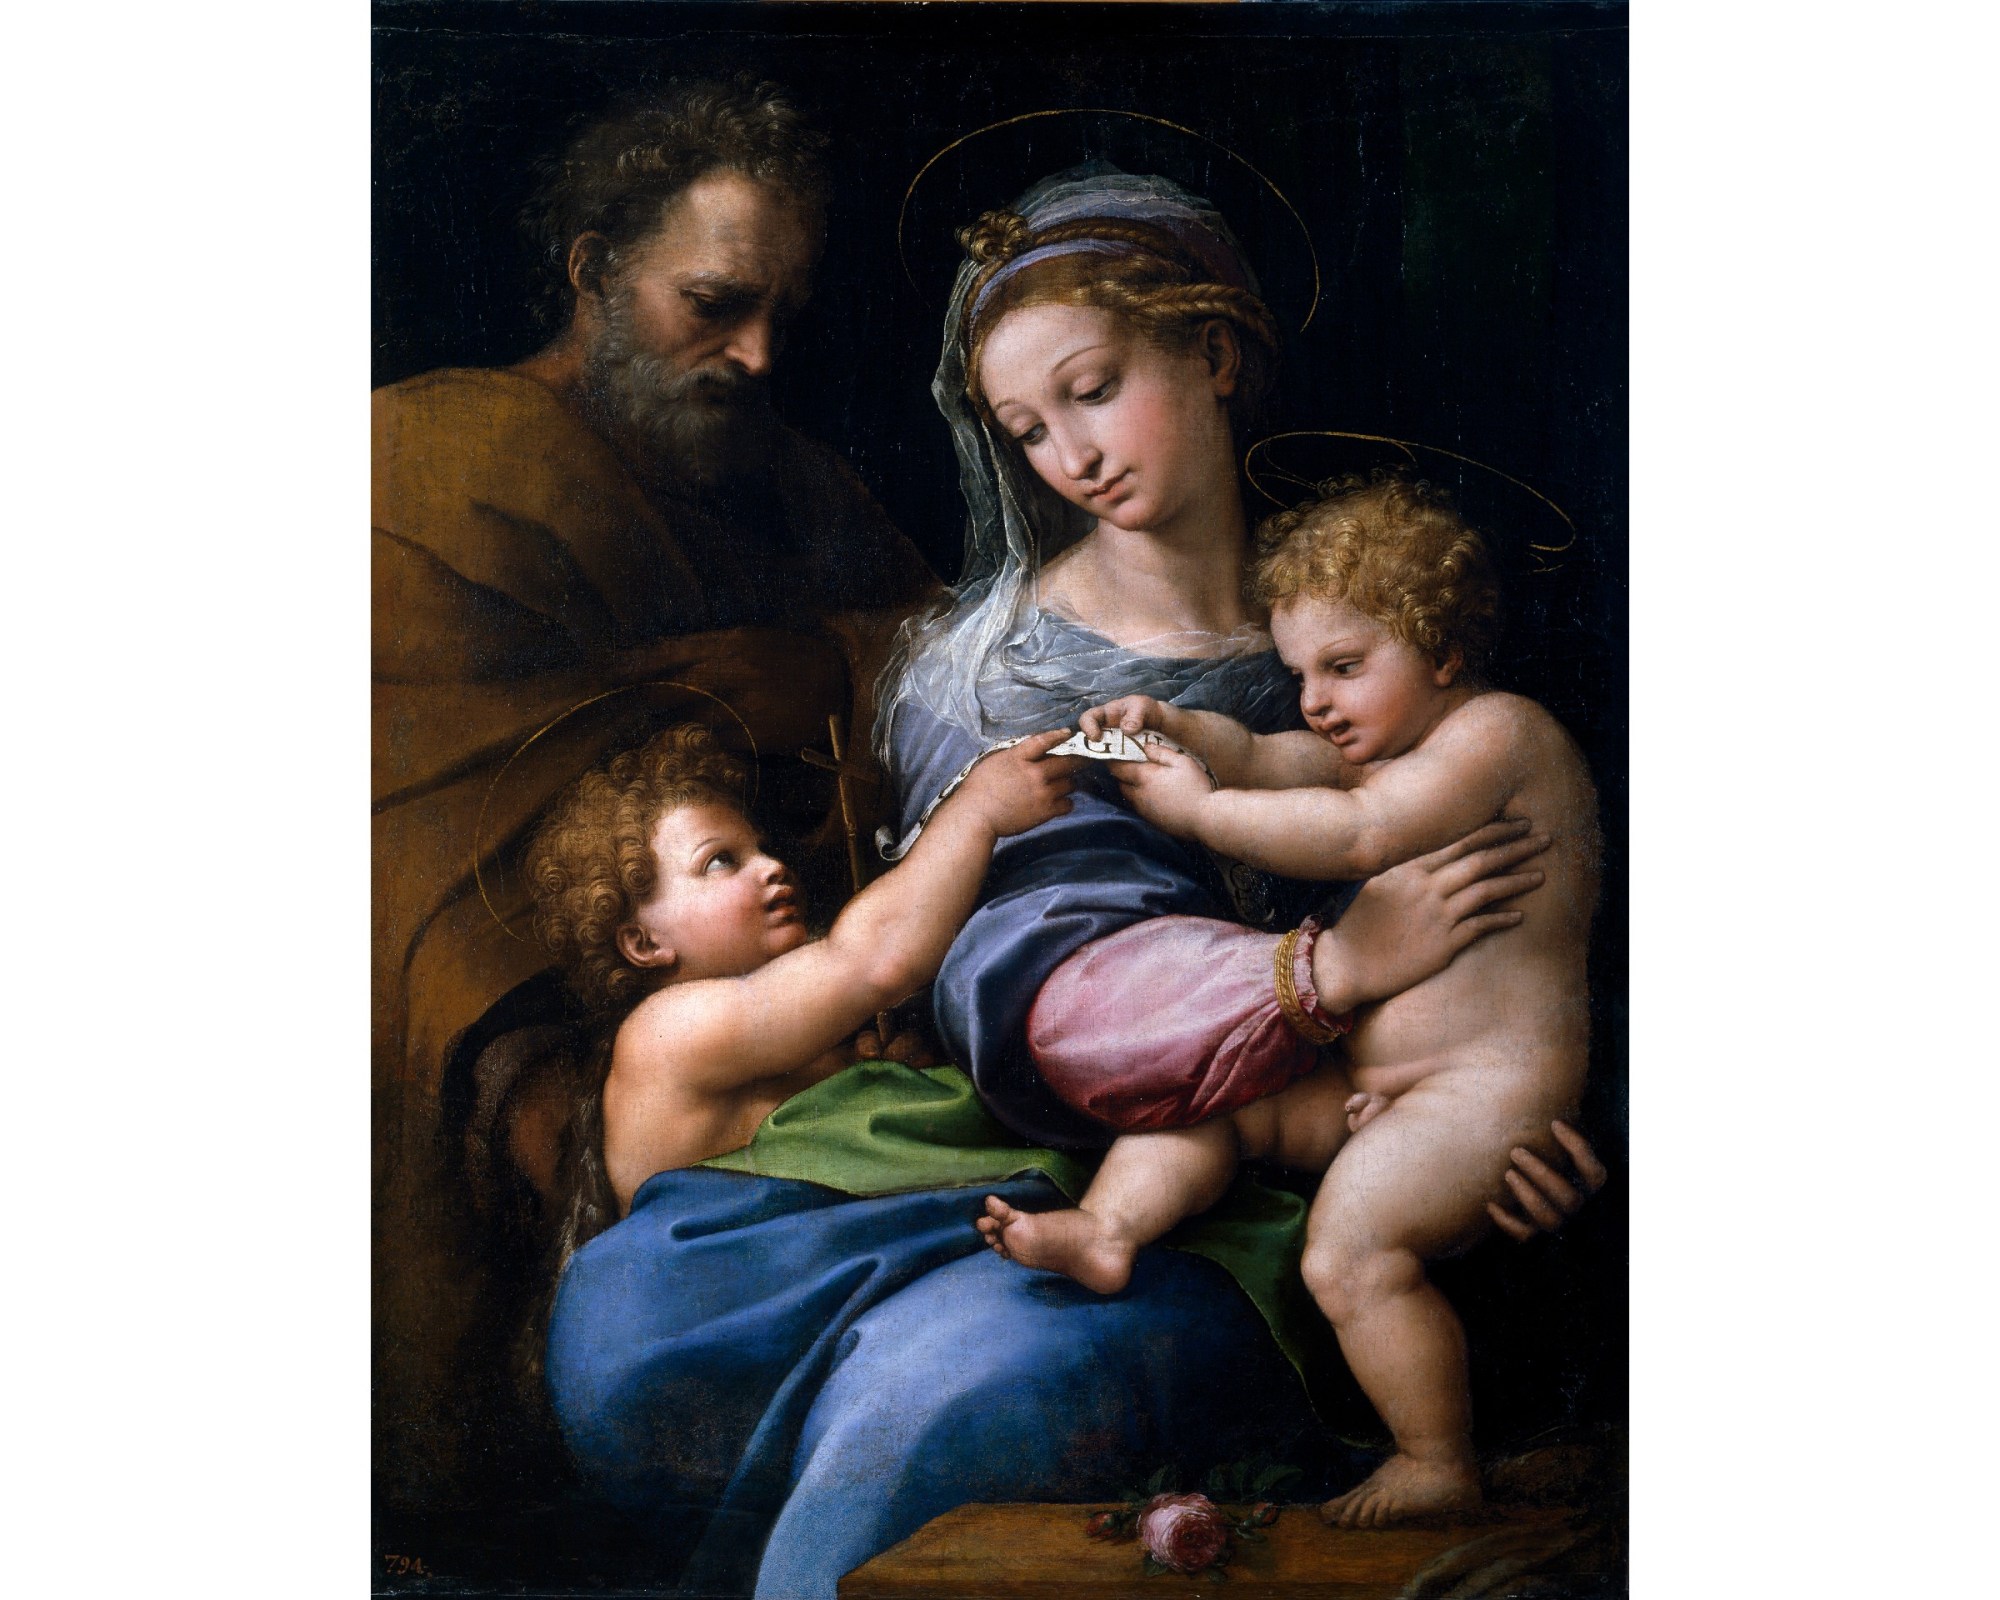 Image of the Raphael painting "The Holy Family with the Infant Saint John the Baptist, or Madonna of the Rose". (1517) Oil on panel transferred to canvas.
In Room 049 at the Museum Nacional del Prado.